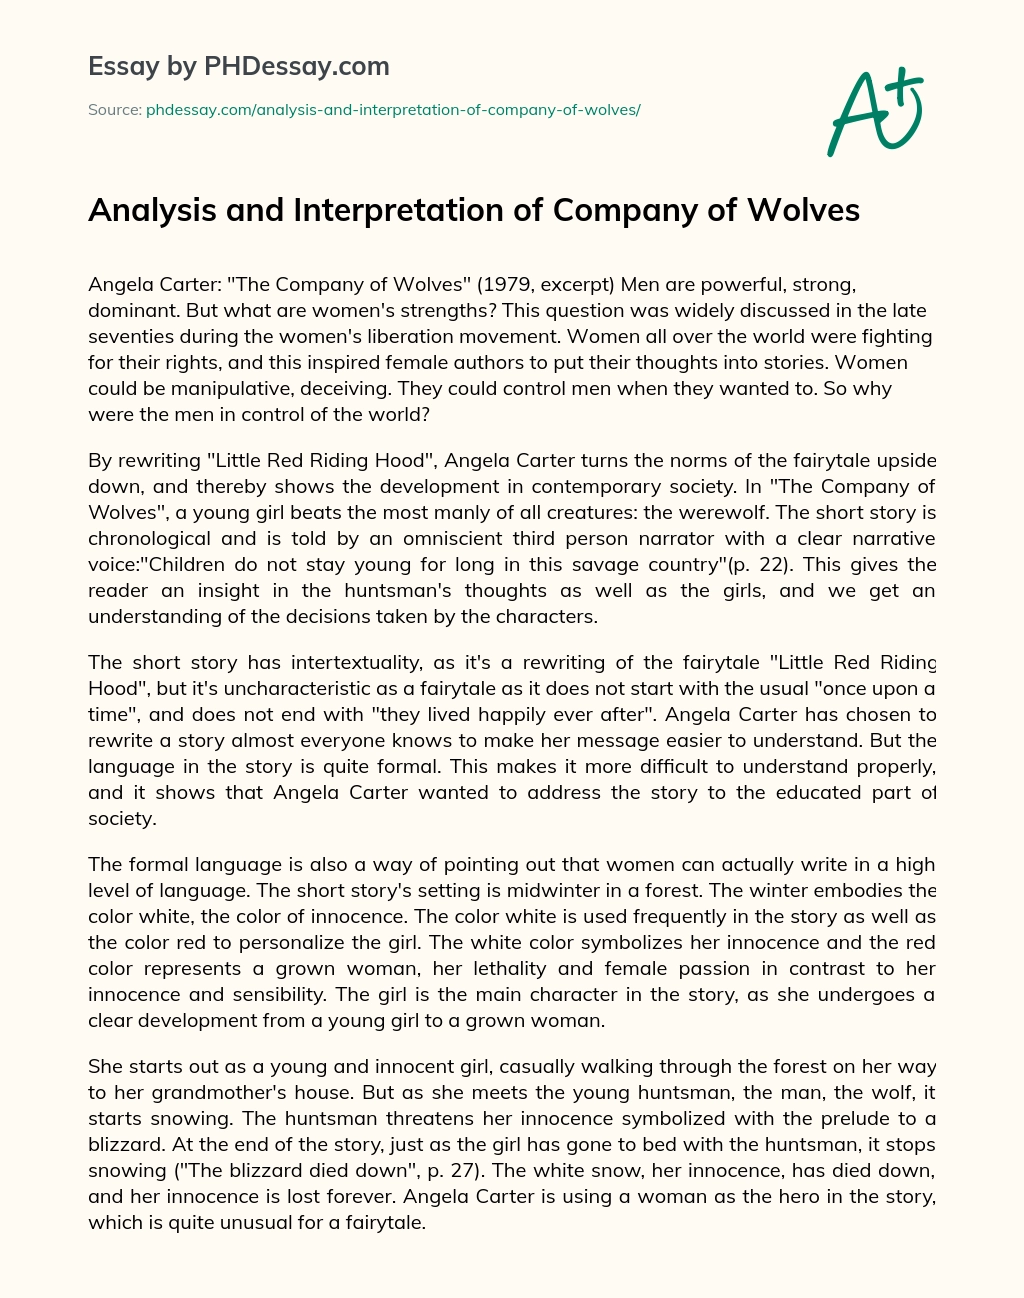 Analysis and Interpretation of Company of Wolves essay